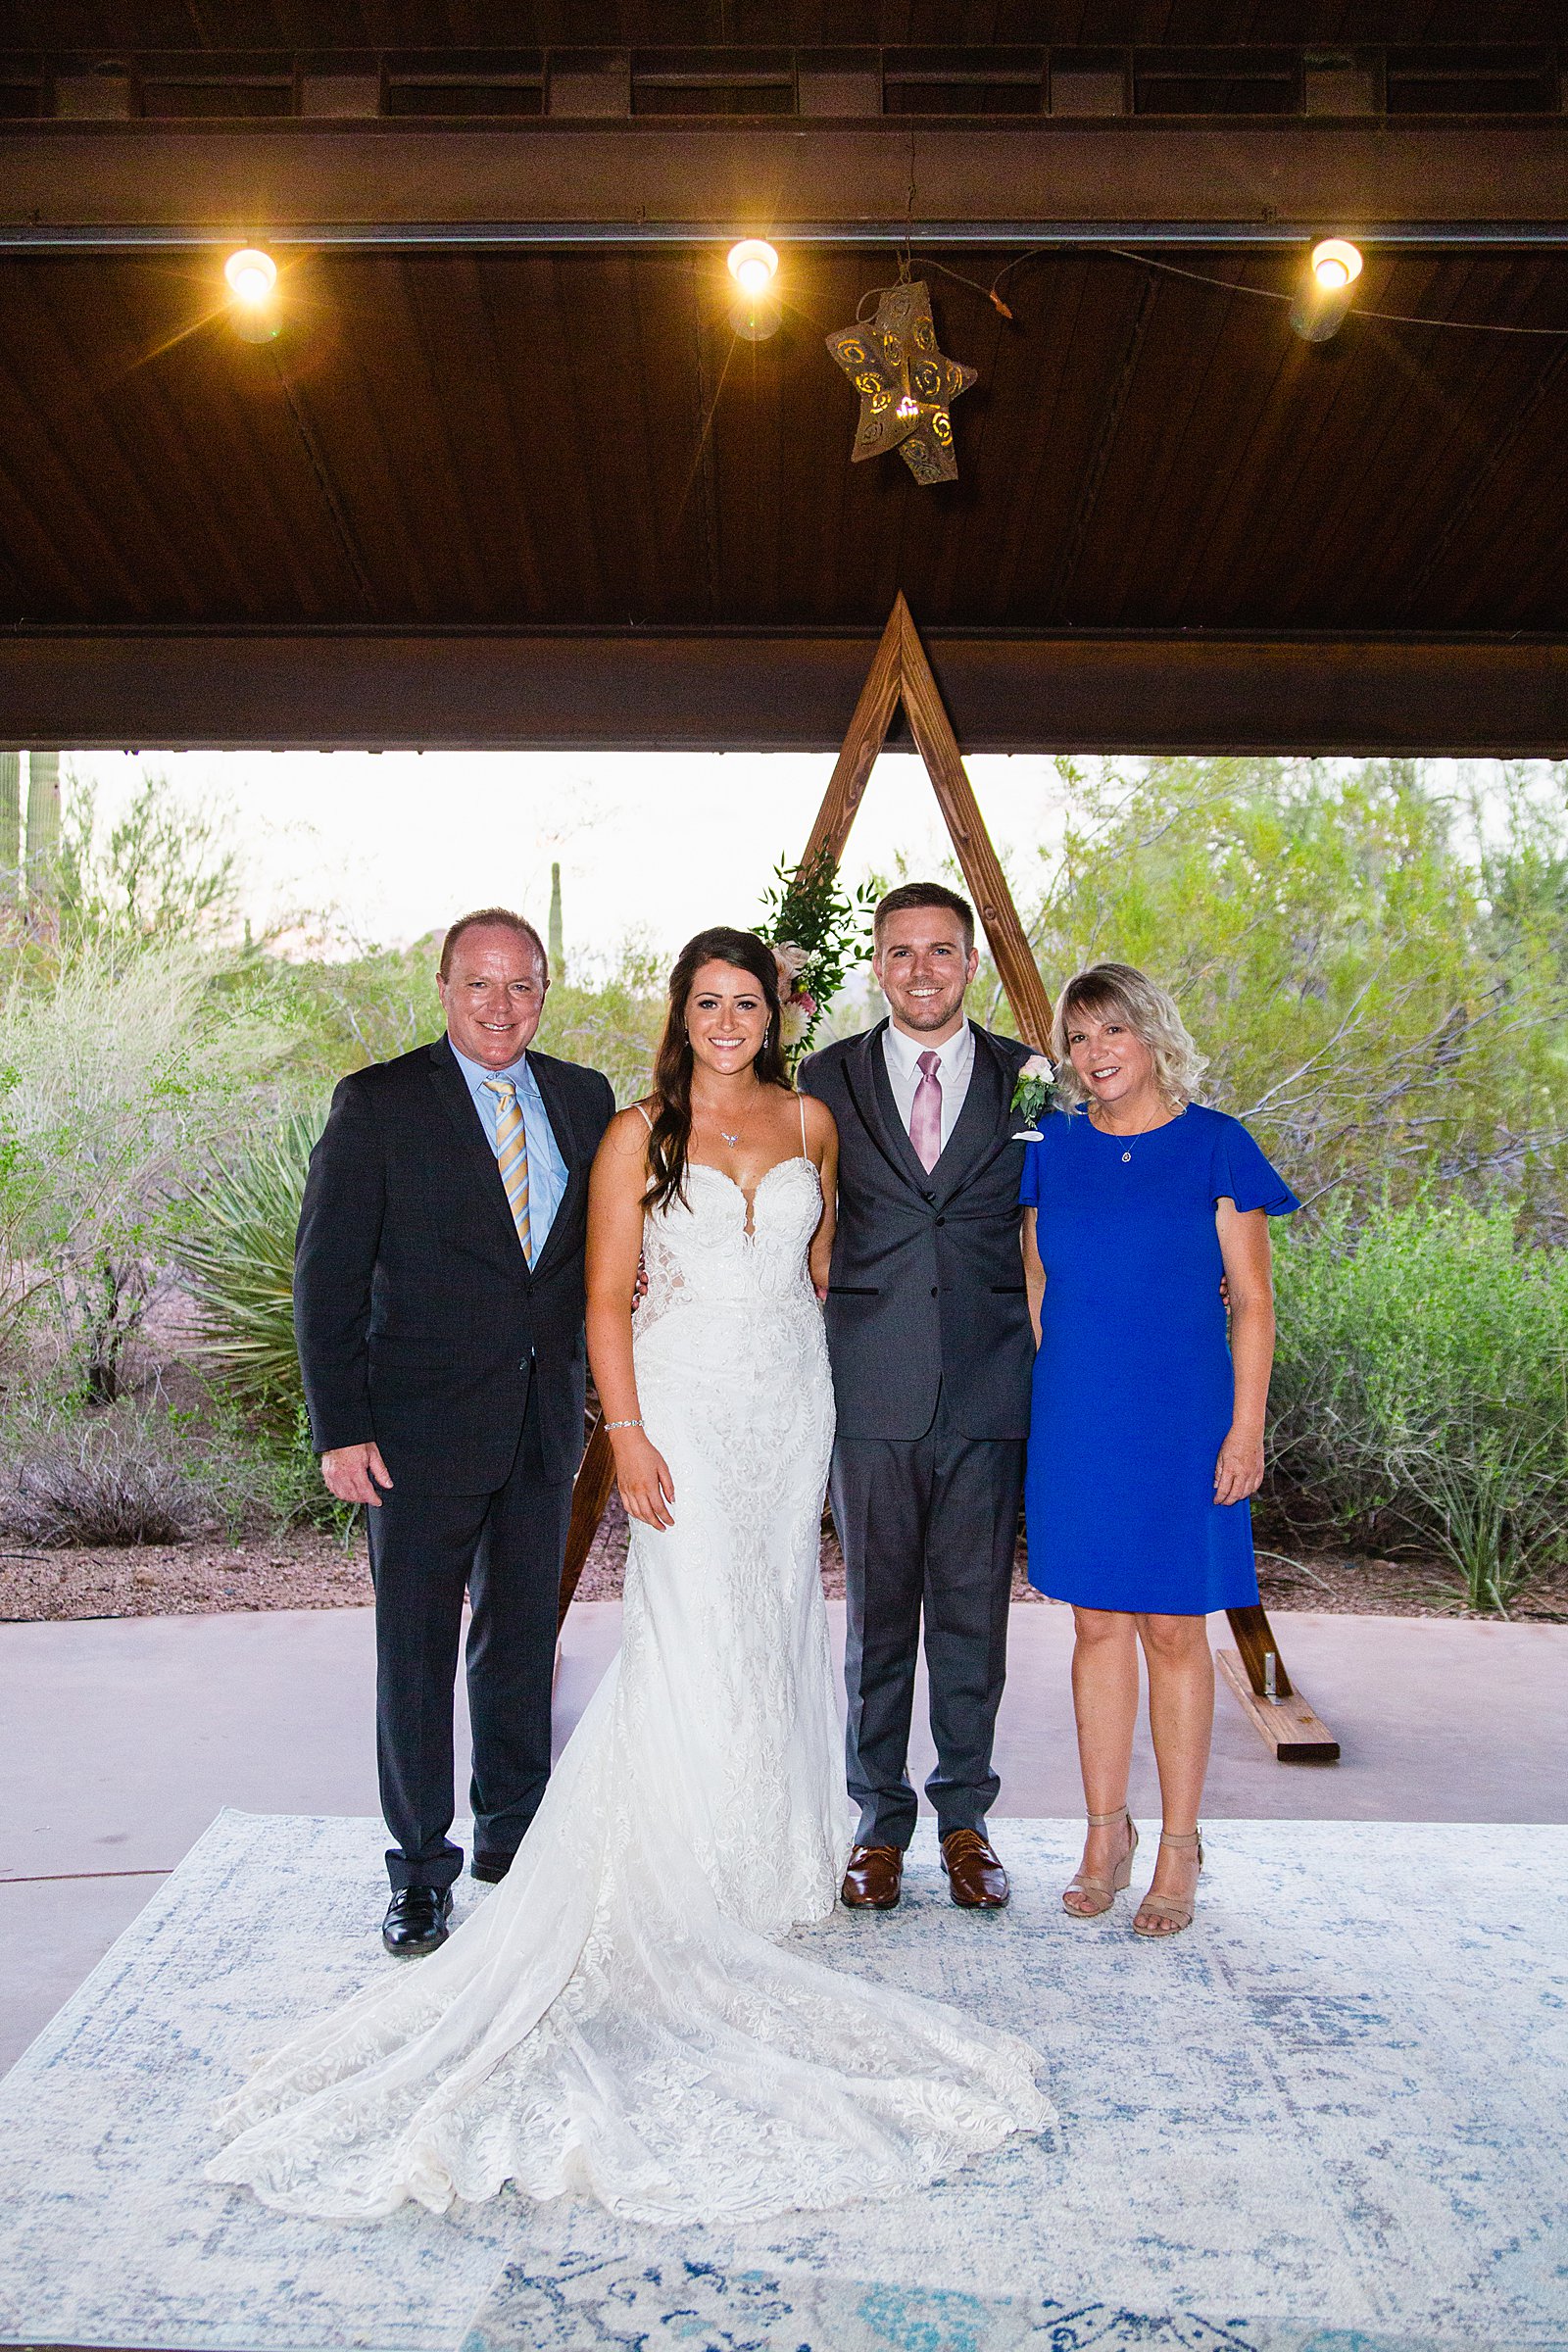 Bride and groom pose with their close family members at their Desert Botanical Garden's wedding by Phoenix wedding photographer PMA Photography.